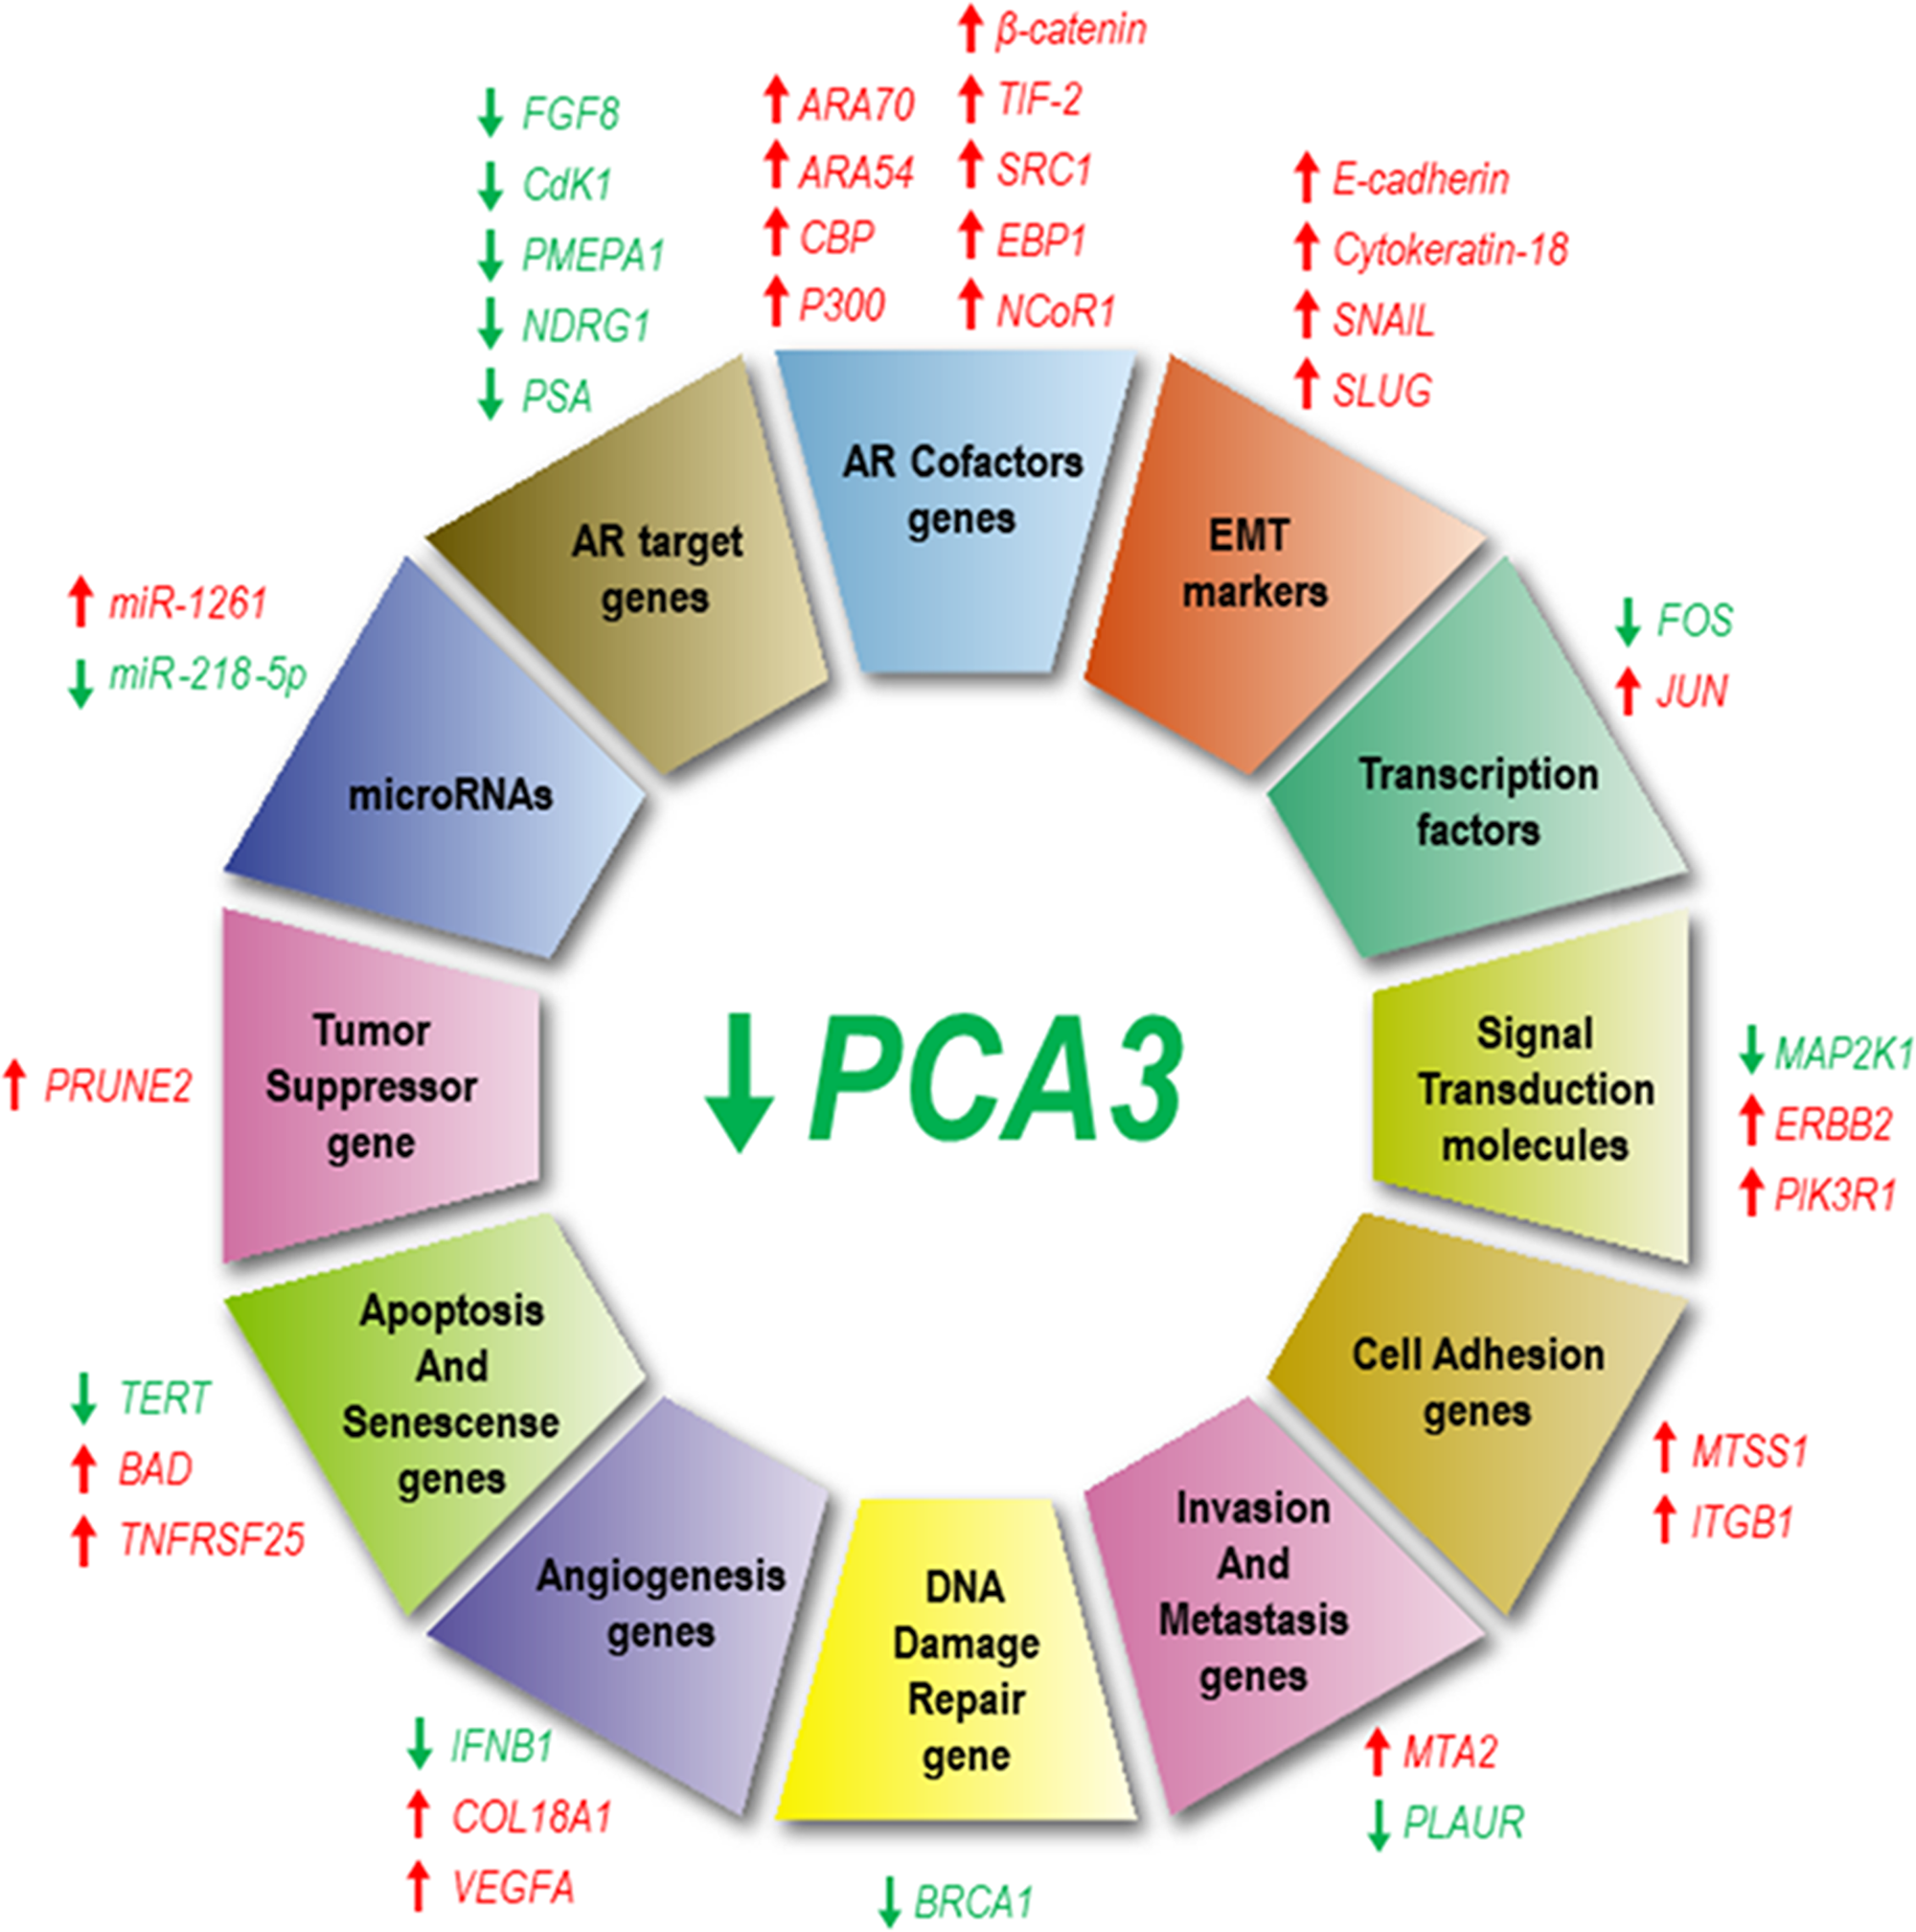 PCA3 silencing modulates the expression of several genes and microRNAs.